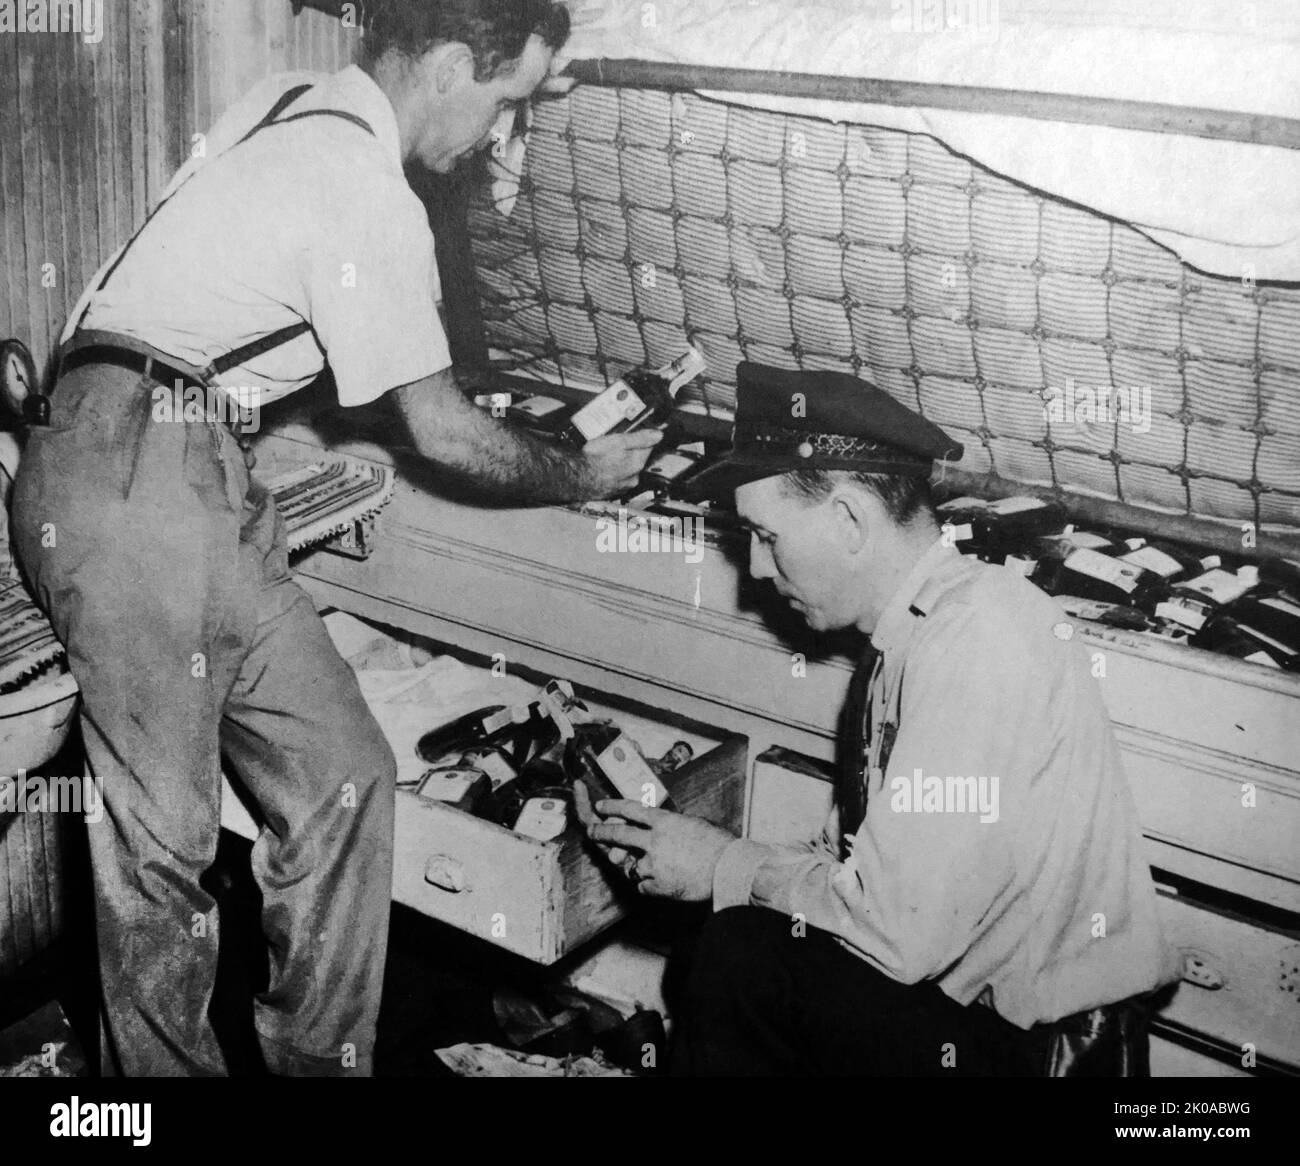 Enforcing prohibition in America. Officials inspect bottles of liquor found under a sailor's mattress on a steamer in Norfolk, Virginia. Prohibition in the United States was a nationwide constitutional ban on the production, importation, transportation, and sale of alcoholic beverages from 1920 to 1933 Stock Photo